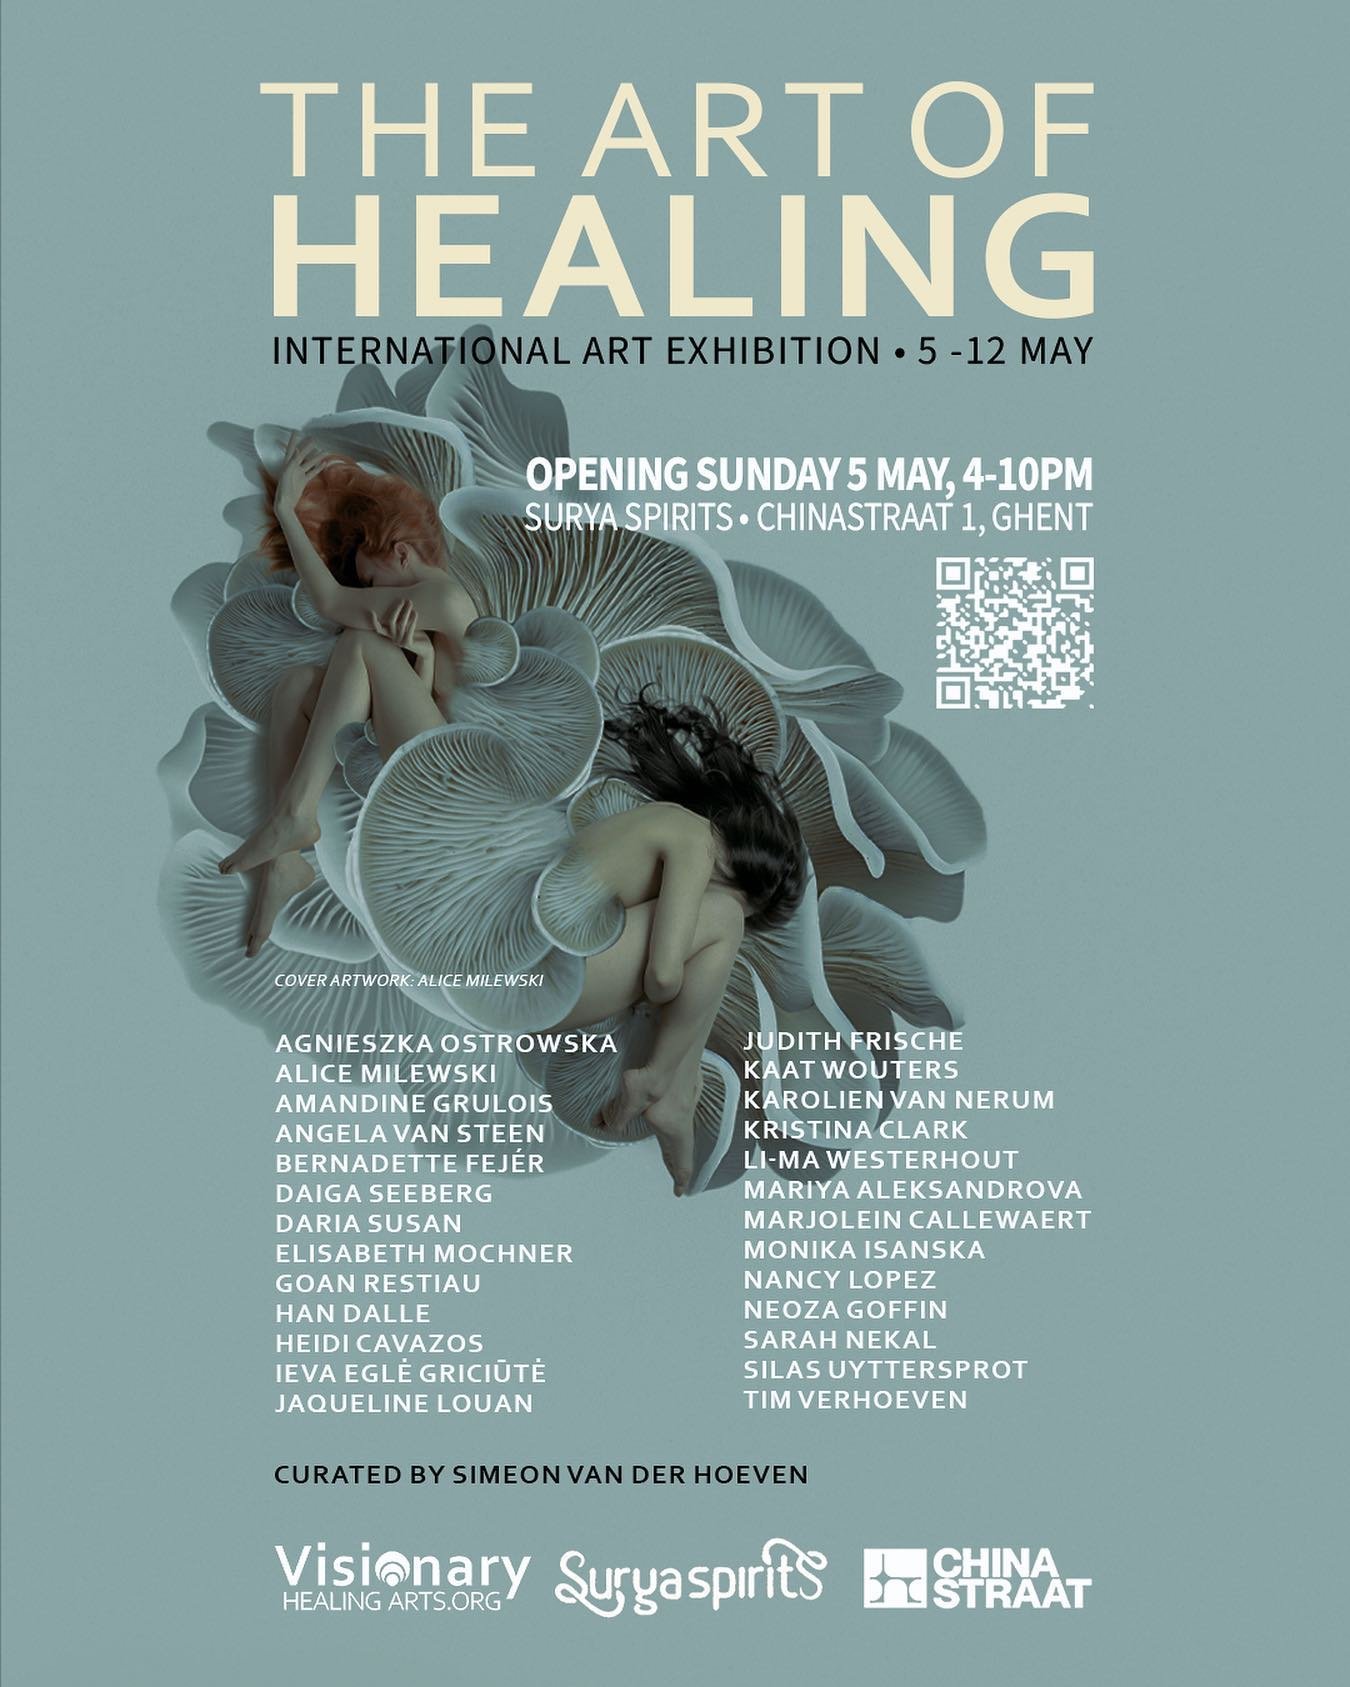 ．
Two of my self portraits have been selected for &ldquo;The Art of Healing&rdquo; art exhibition. This group show is curated and produced by Simeon Van der Hoeven and Visionary Healing Arts and will take place in Chinastraat in Ghent, Belgium May 5-